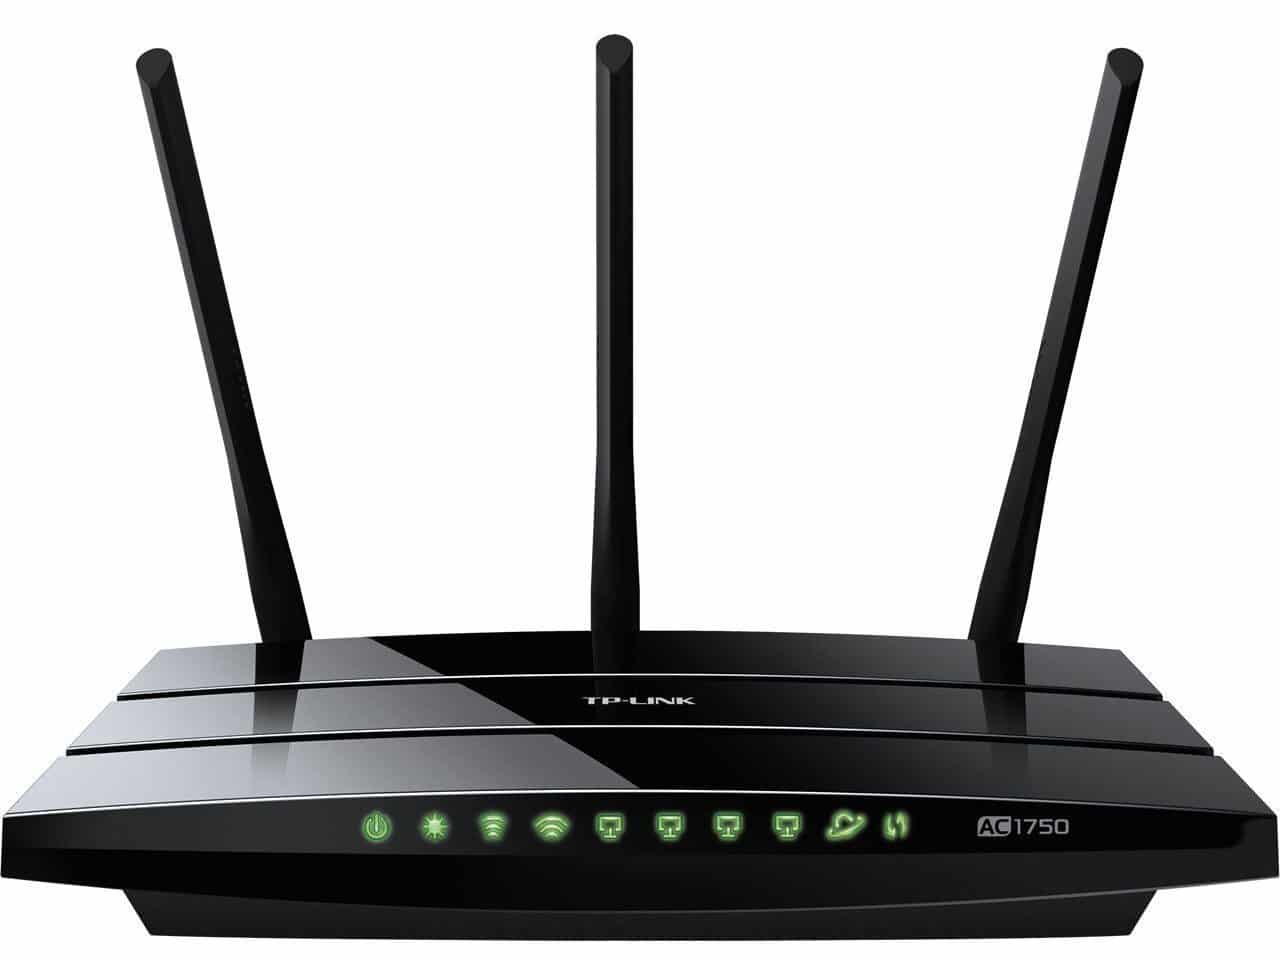 10 Best Wireless Routers in 2017 - Wi-Fi Smart Router Reviews for Home